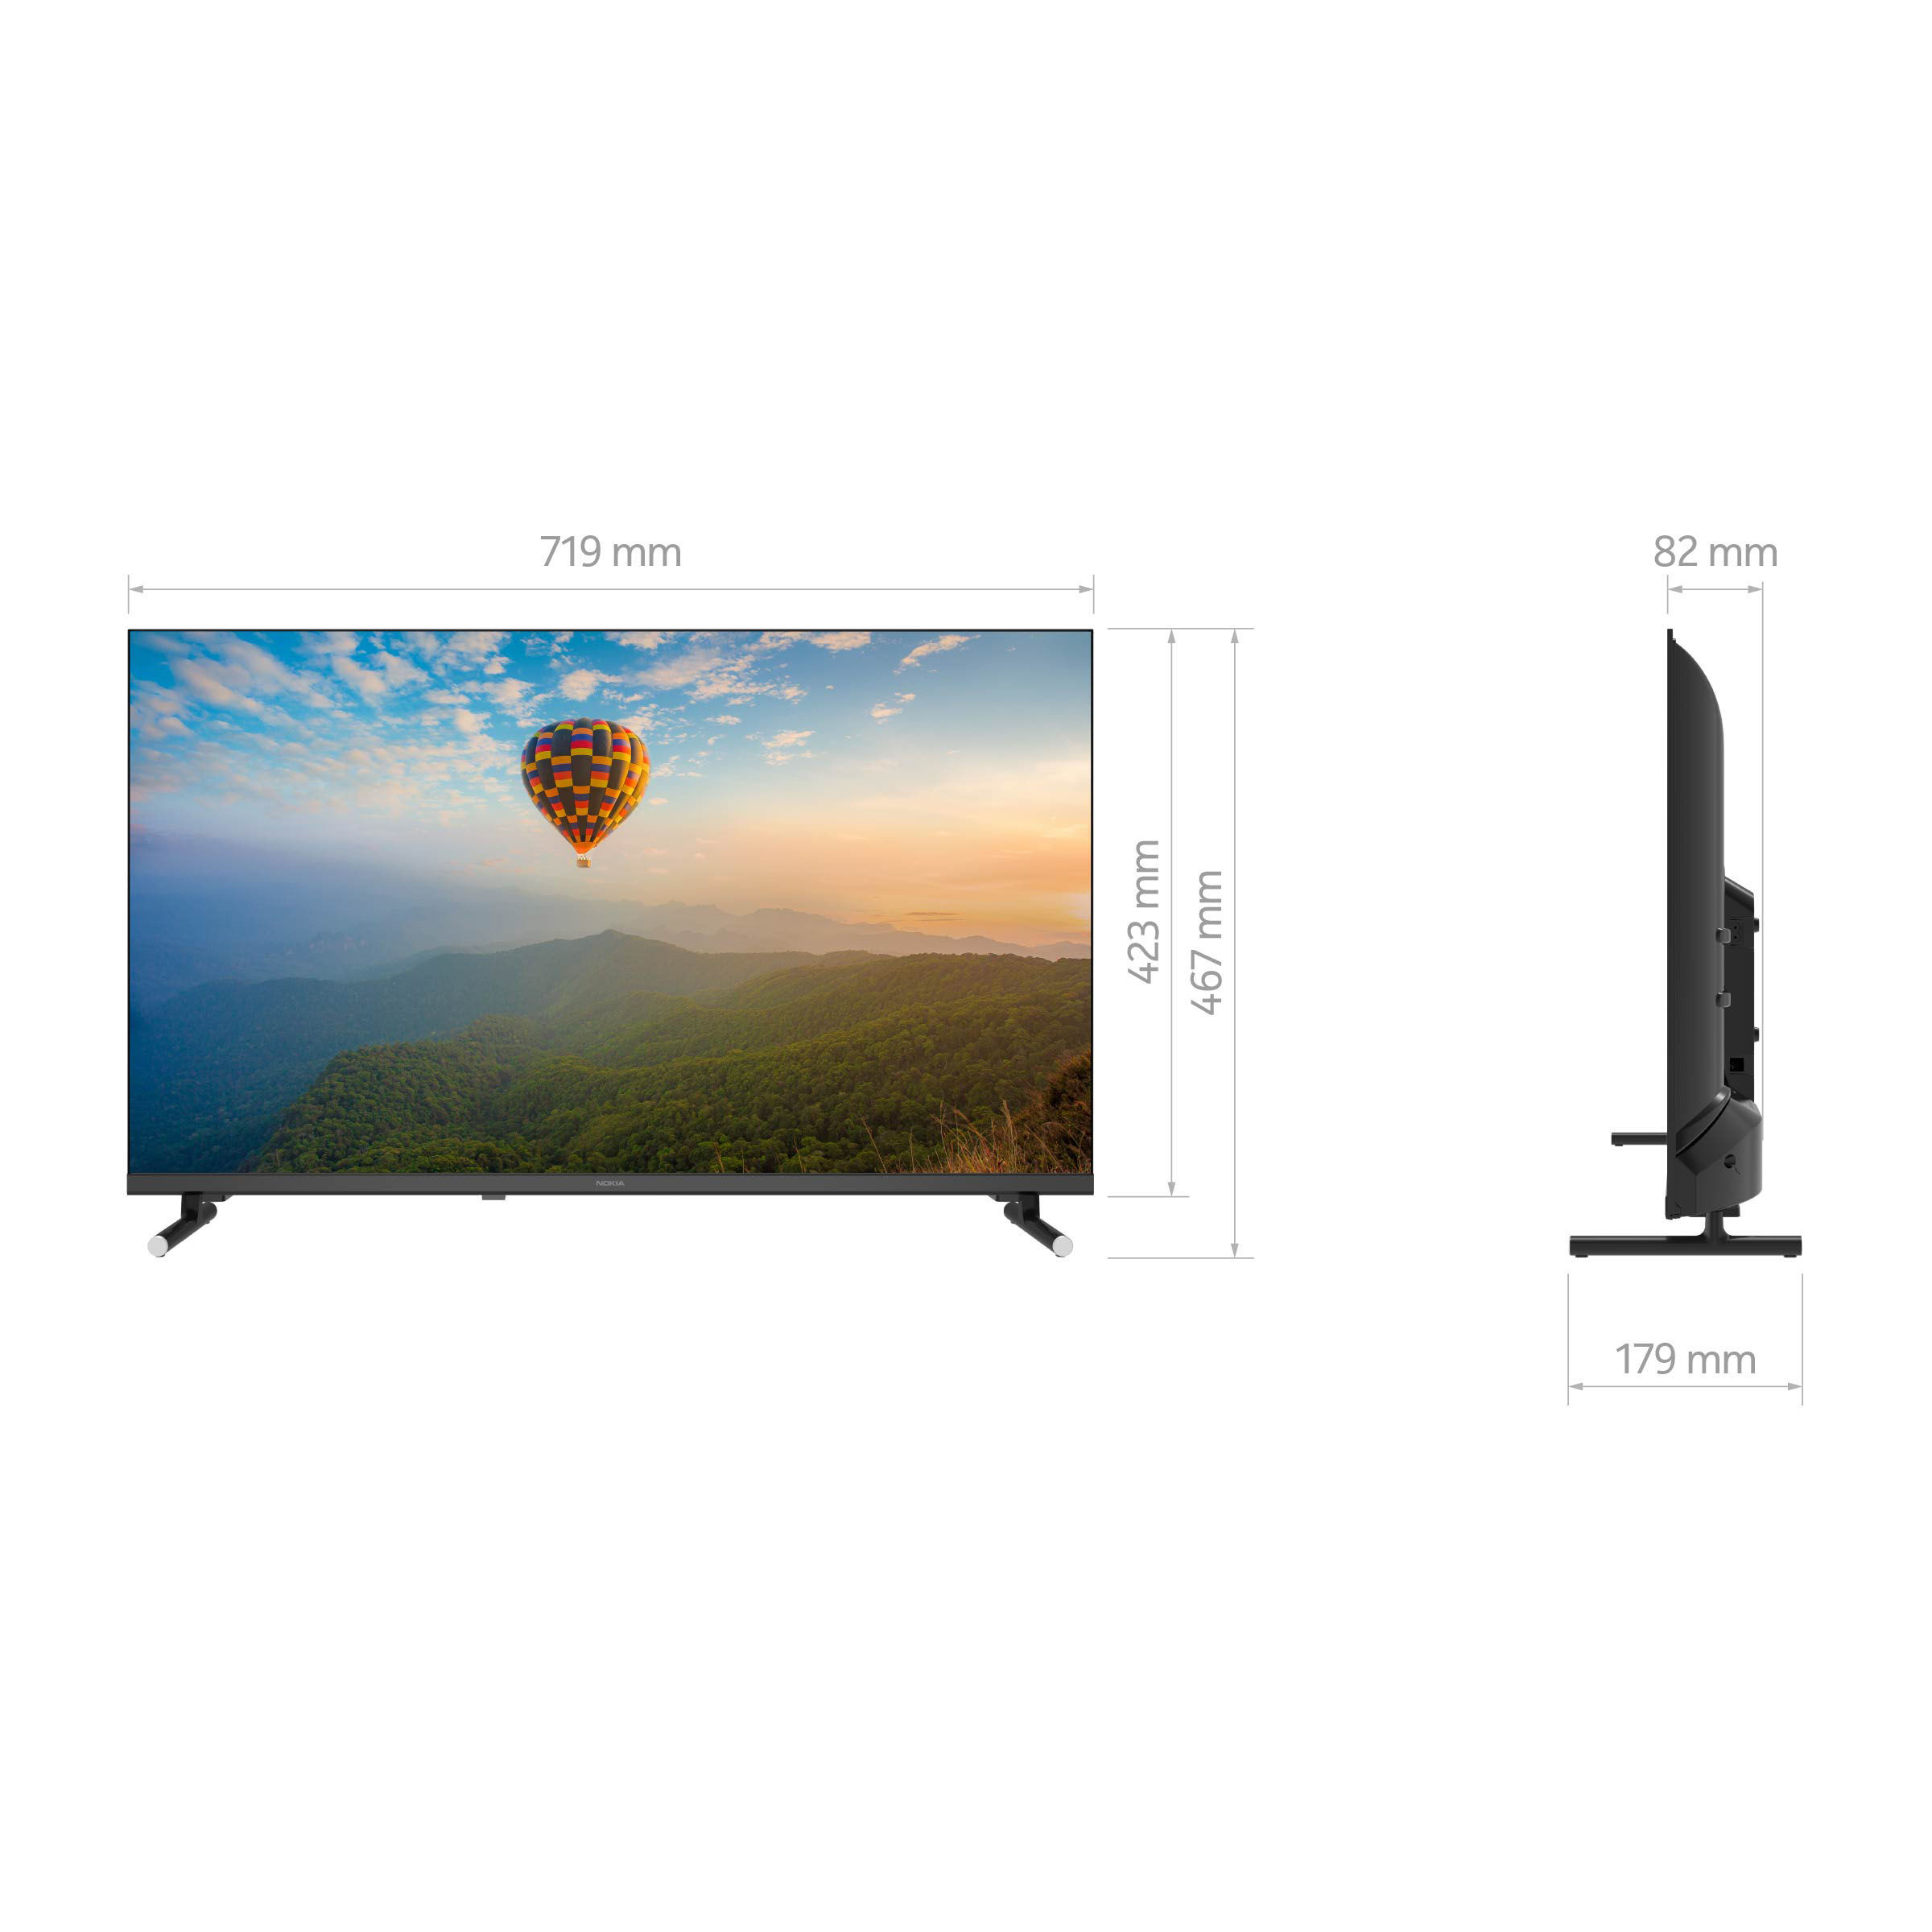 NOKIA HN32GE320C LED TV 81 TV, Android) HD, SMART / (Flat, Zoll cm, 32